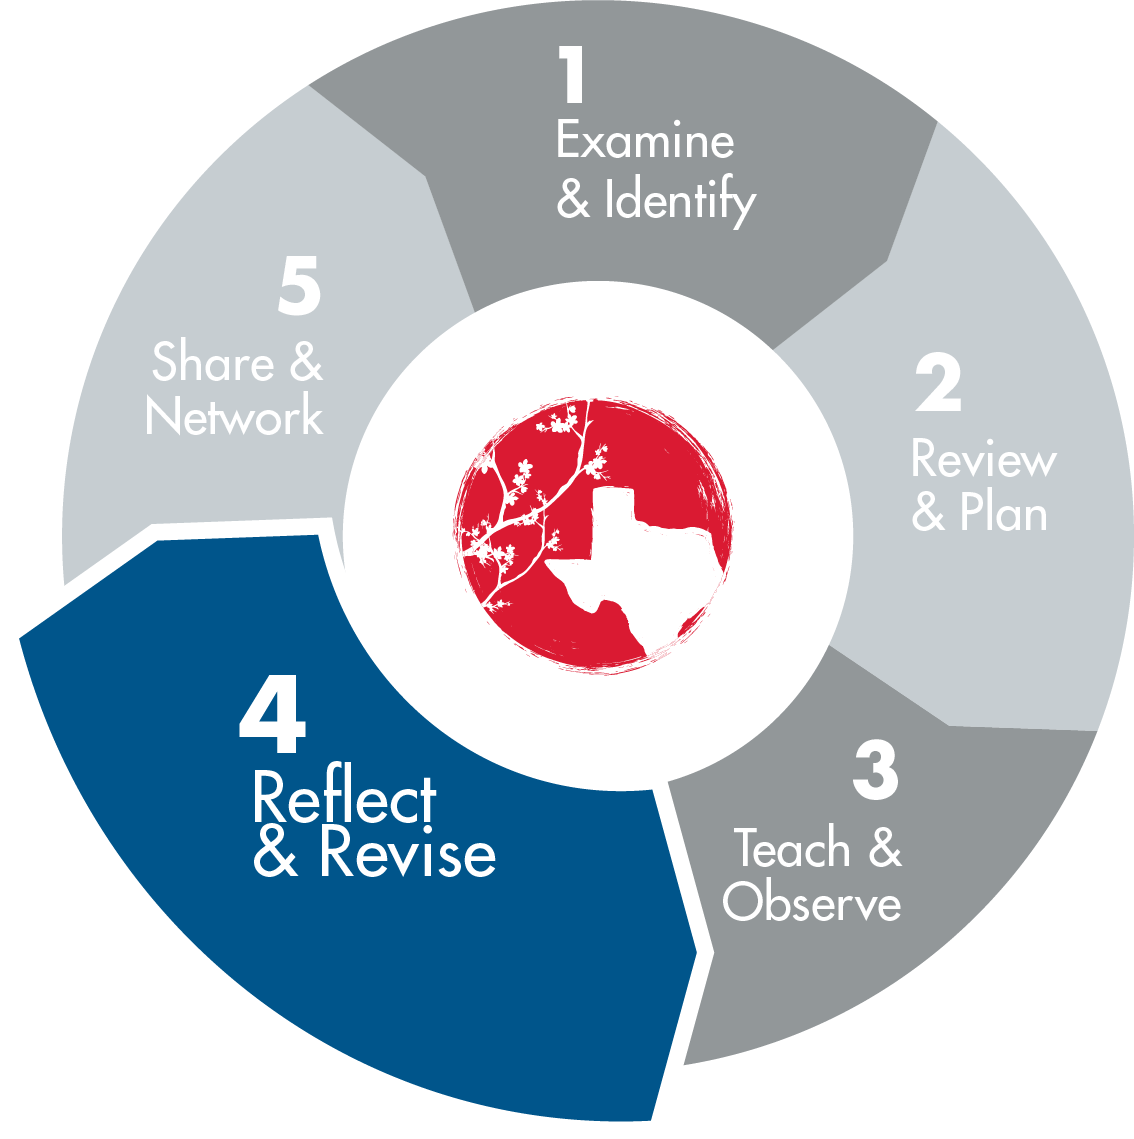 TEXAS LESSON STUDY  5 PHASES - 1. Examine & Identify, 2. Review & Plan, 3. Teach & Observe, 4. Reflect & Revise and 5. Share & Network,  where phase 4 is visually selected